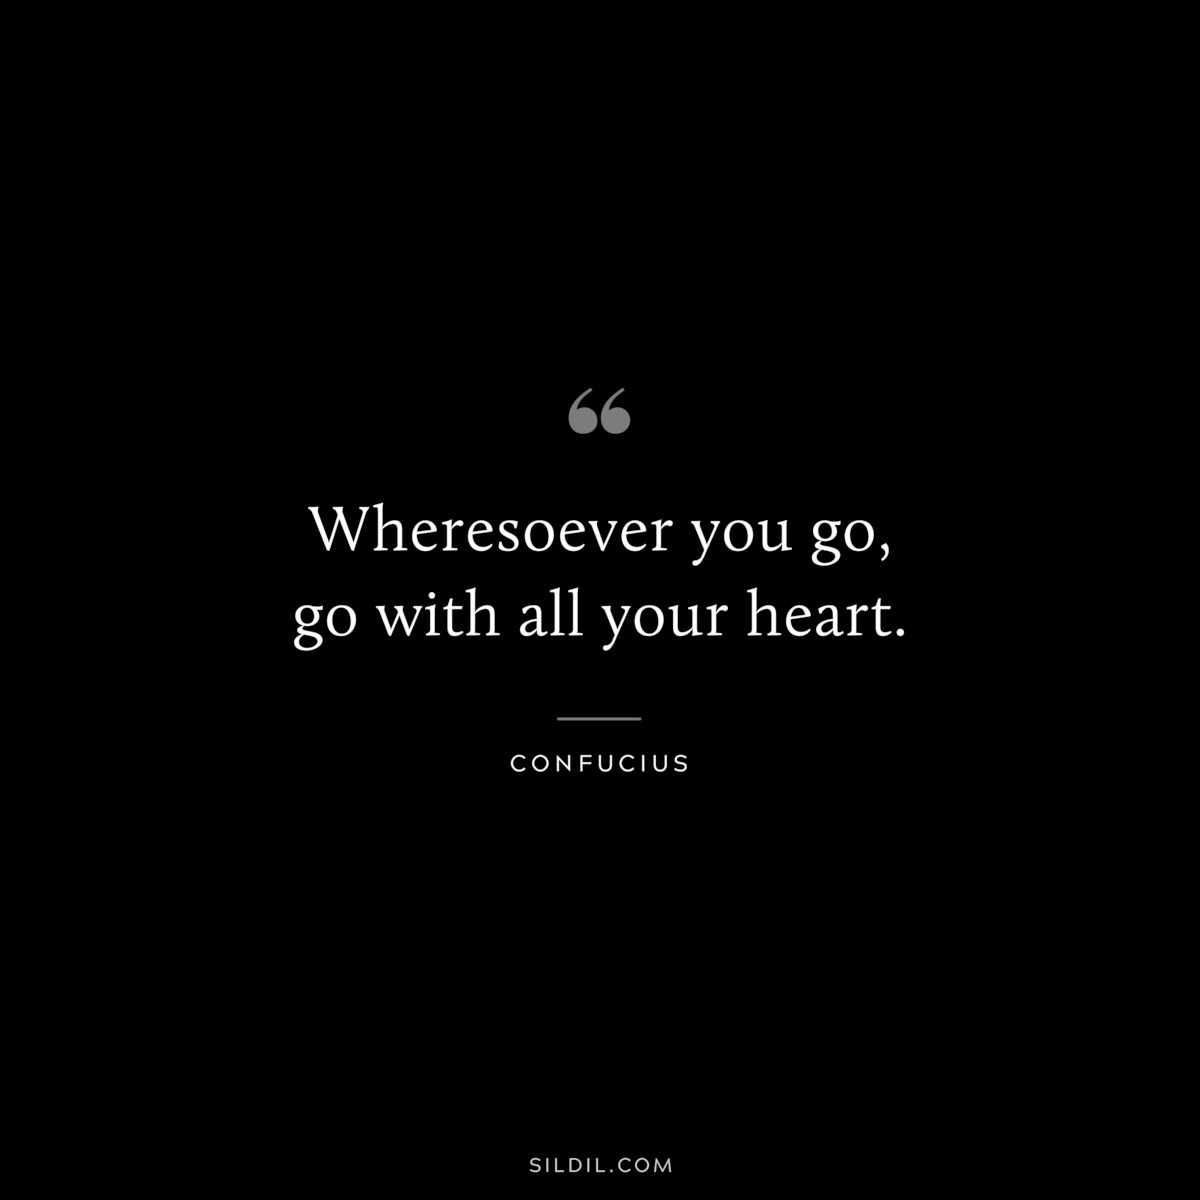 Wheresoever you go, go with all your heart. ― Confucius